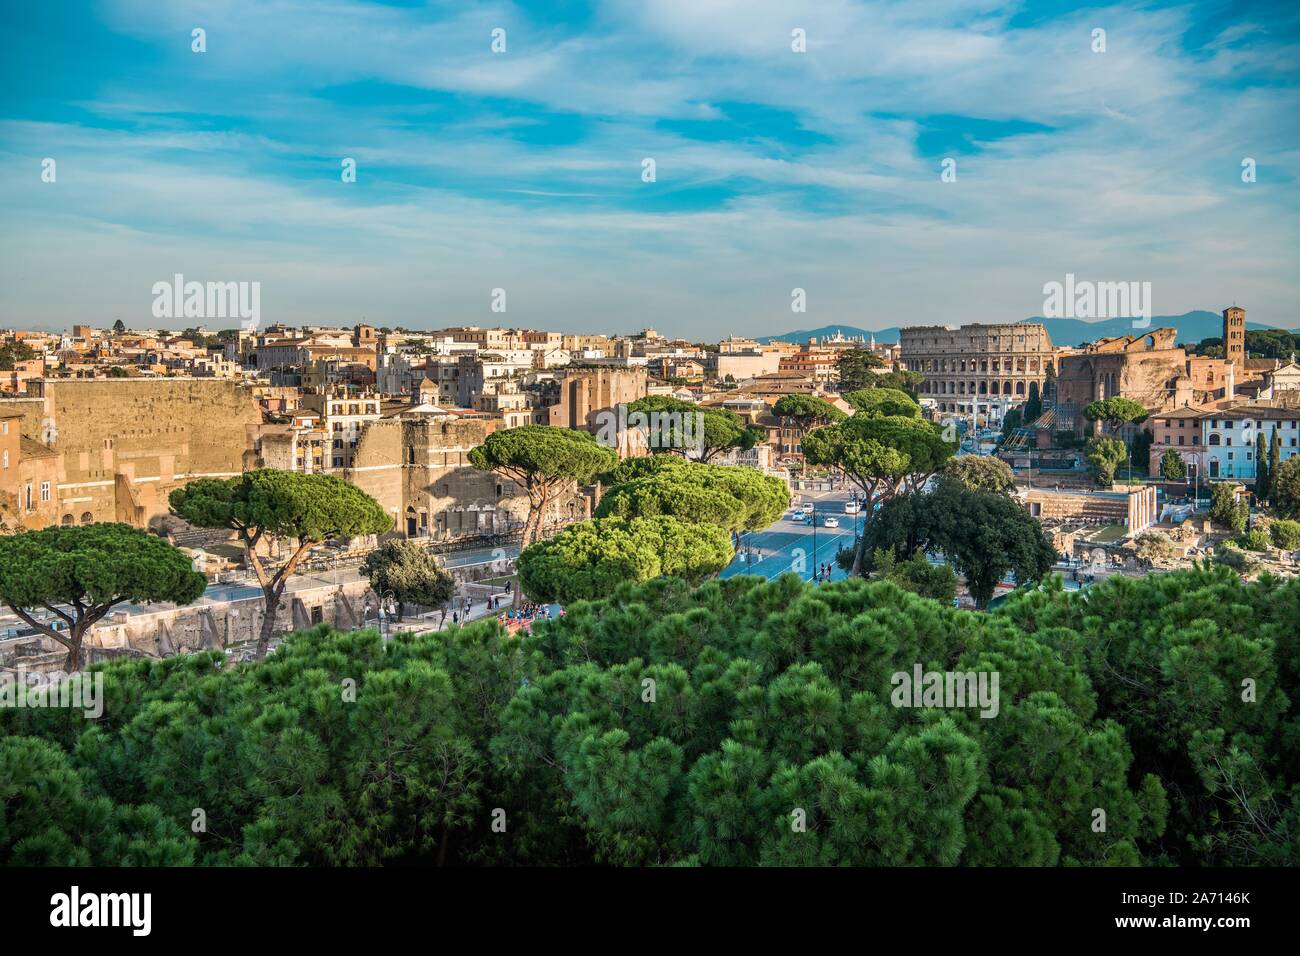 City of Rome Panorama with Colosseum and Roman Forum and Market. Clear Blue Sky with Some Small Clouds. Capitol of the Lazio Region. Stock Photo